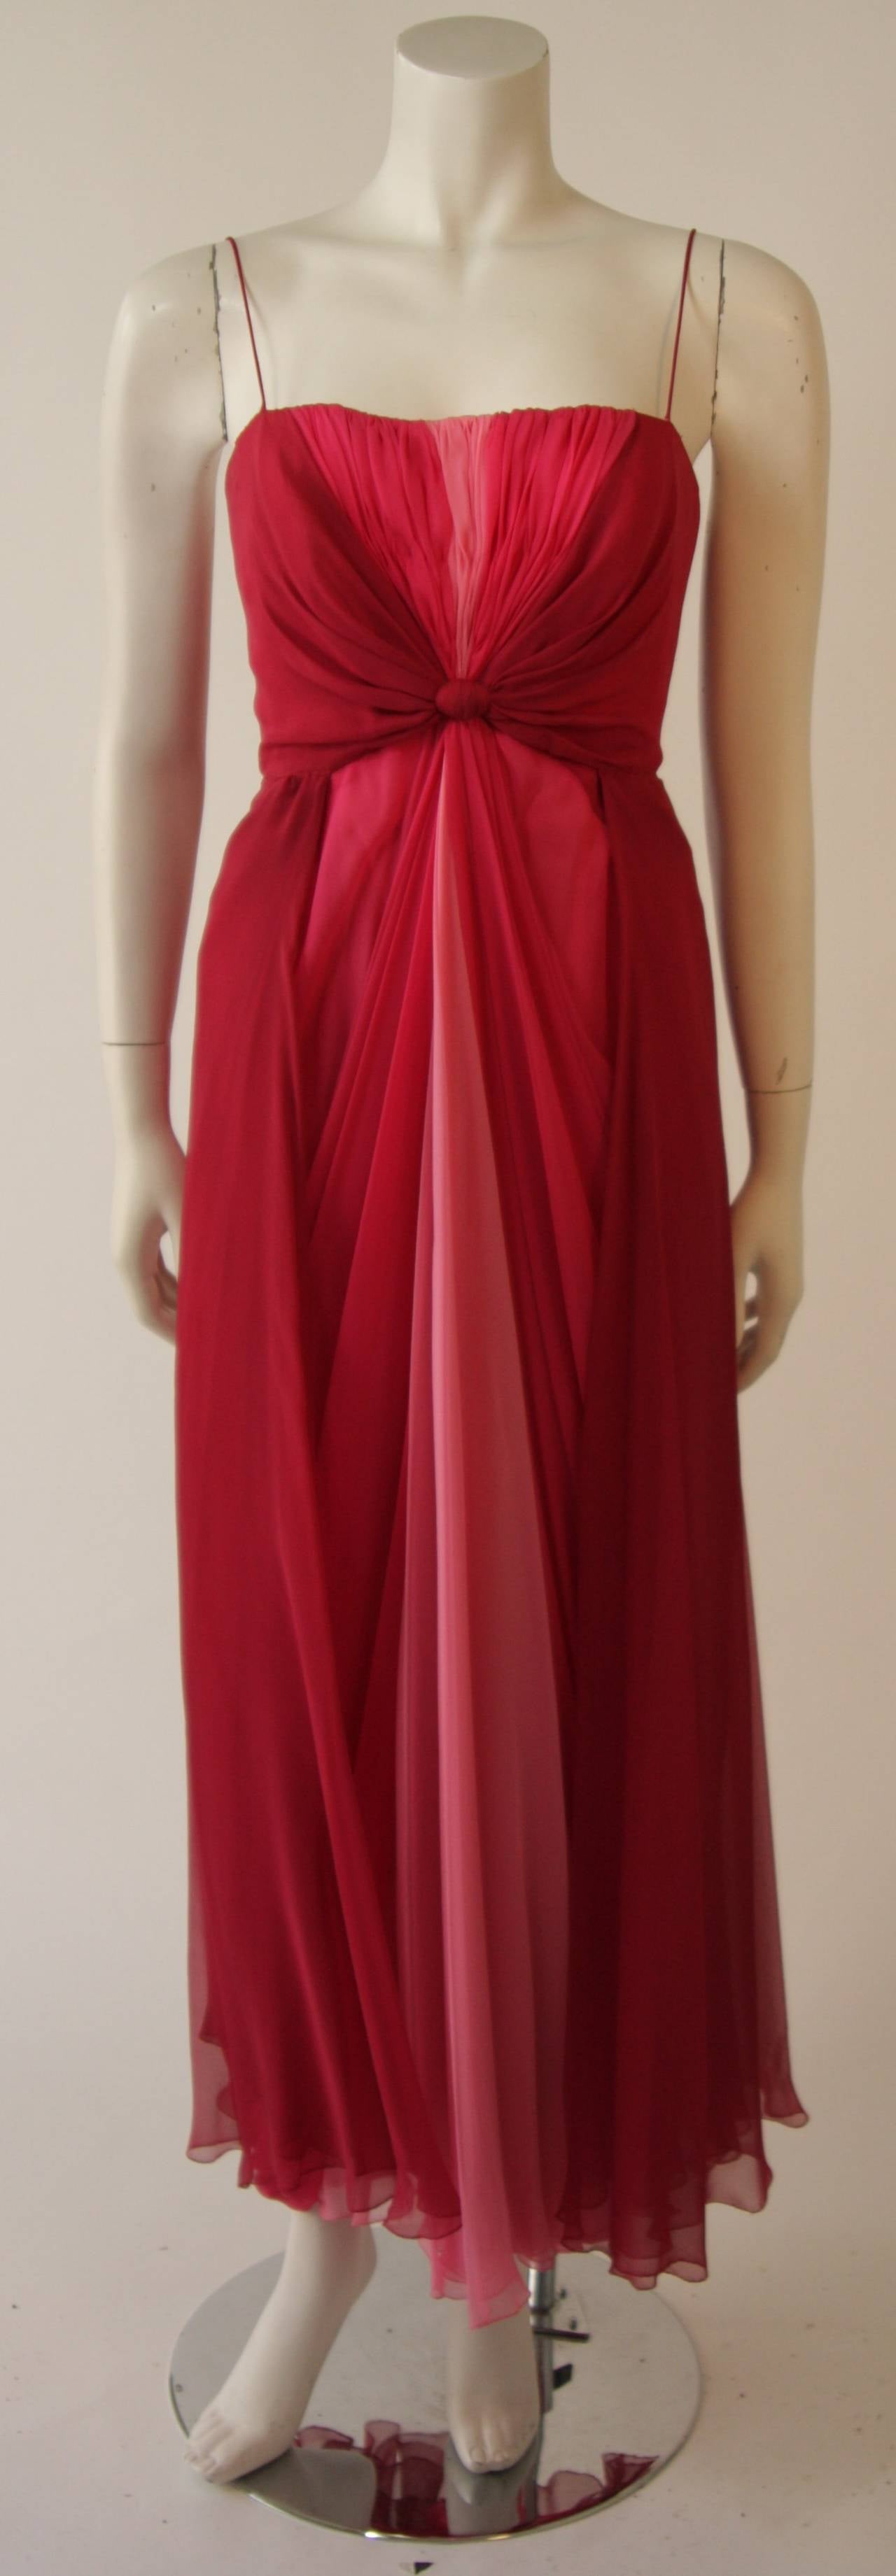 This Myer Kahan gown is composed of a silk chiffon in rose and pink hues. Features an empire waist which drapes at into the skirt creating a gorgeous goddess silhouette. There is a zipper back closure. 

Measures (Approximately)
Length: 48